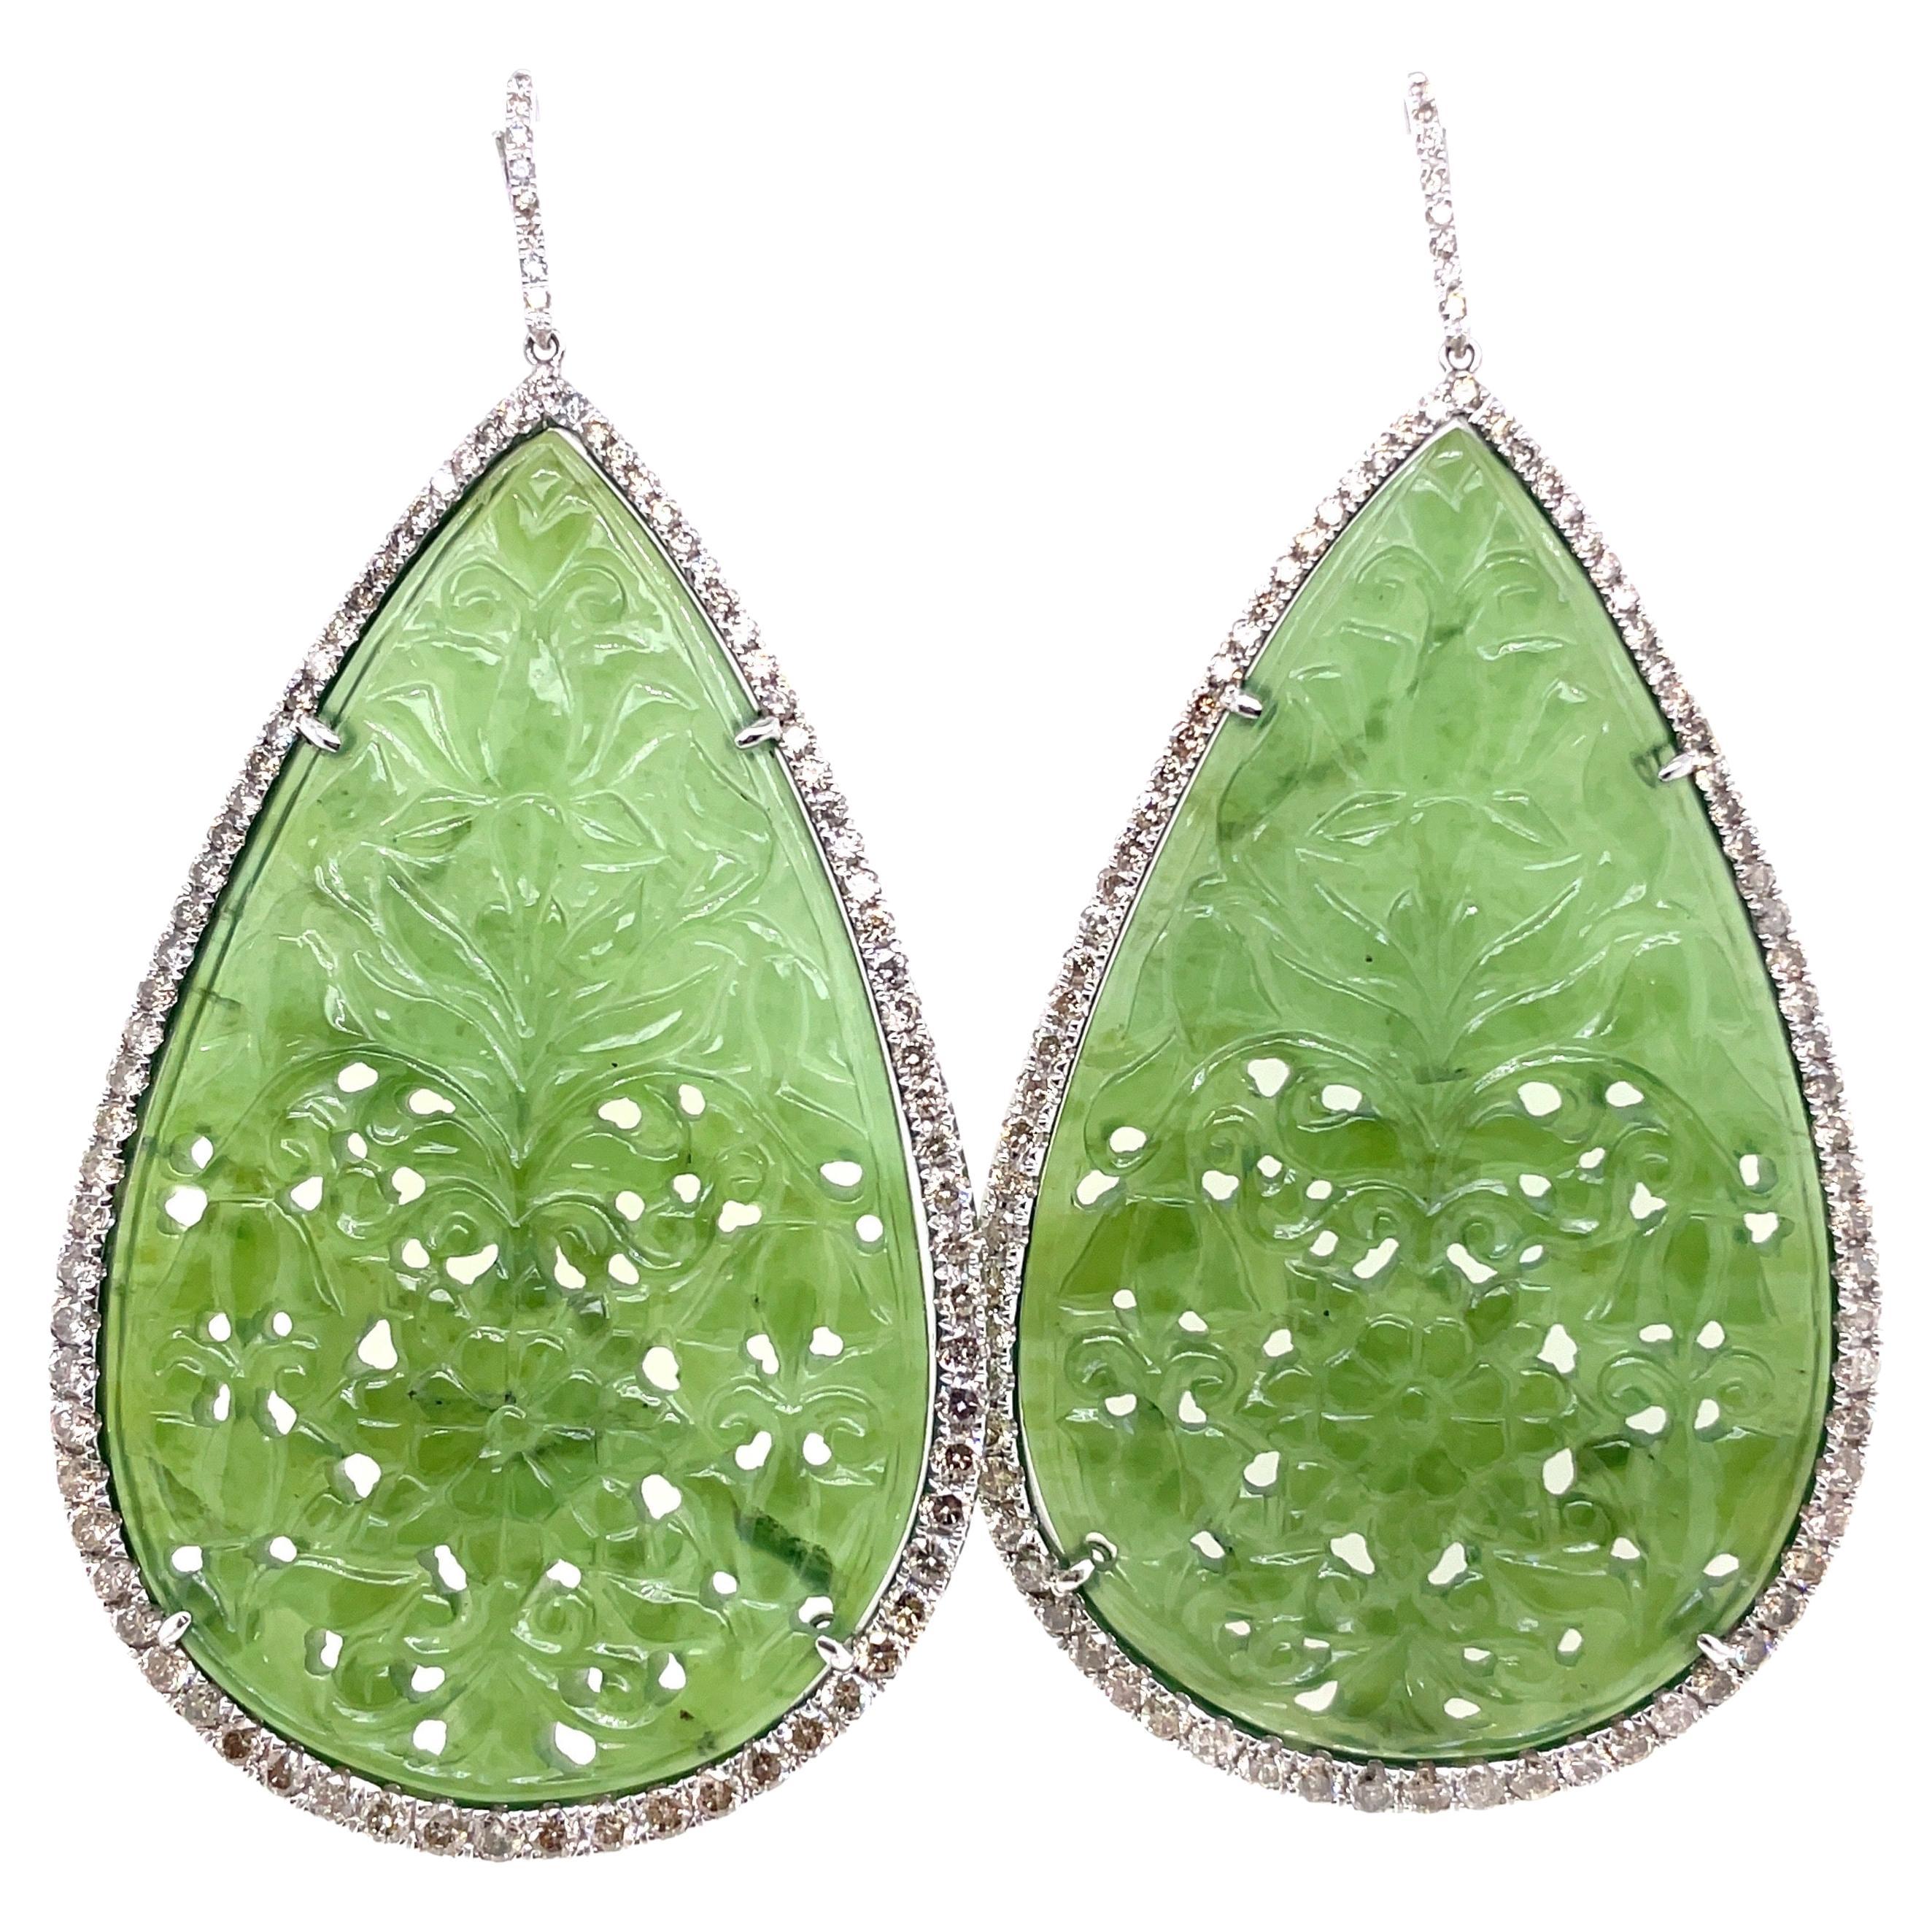 Pear-Shaped Serpentine Carvings Cts 116.39 & Diamond Earrings set 18k White Gold For Sale